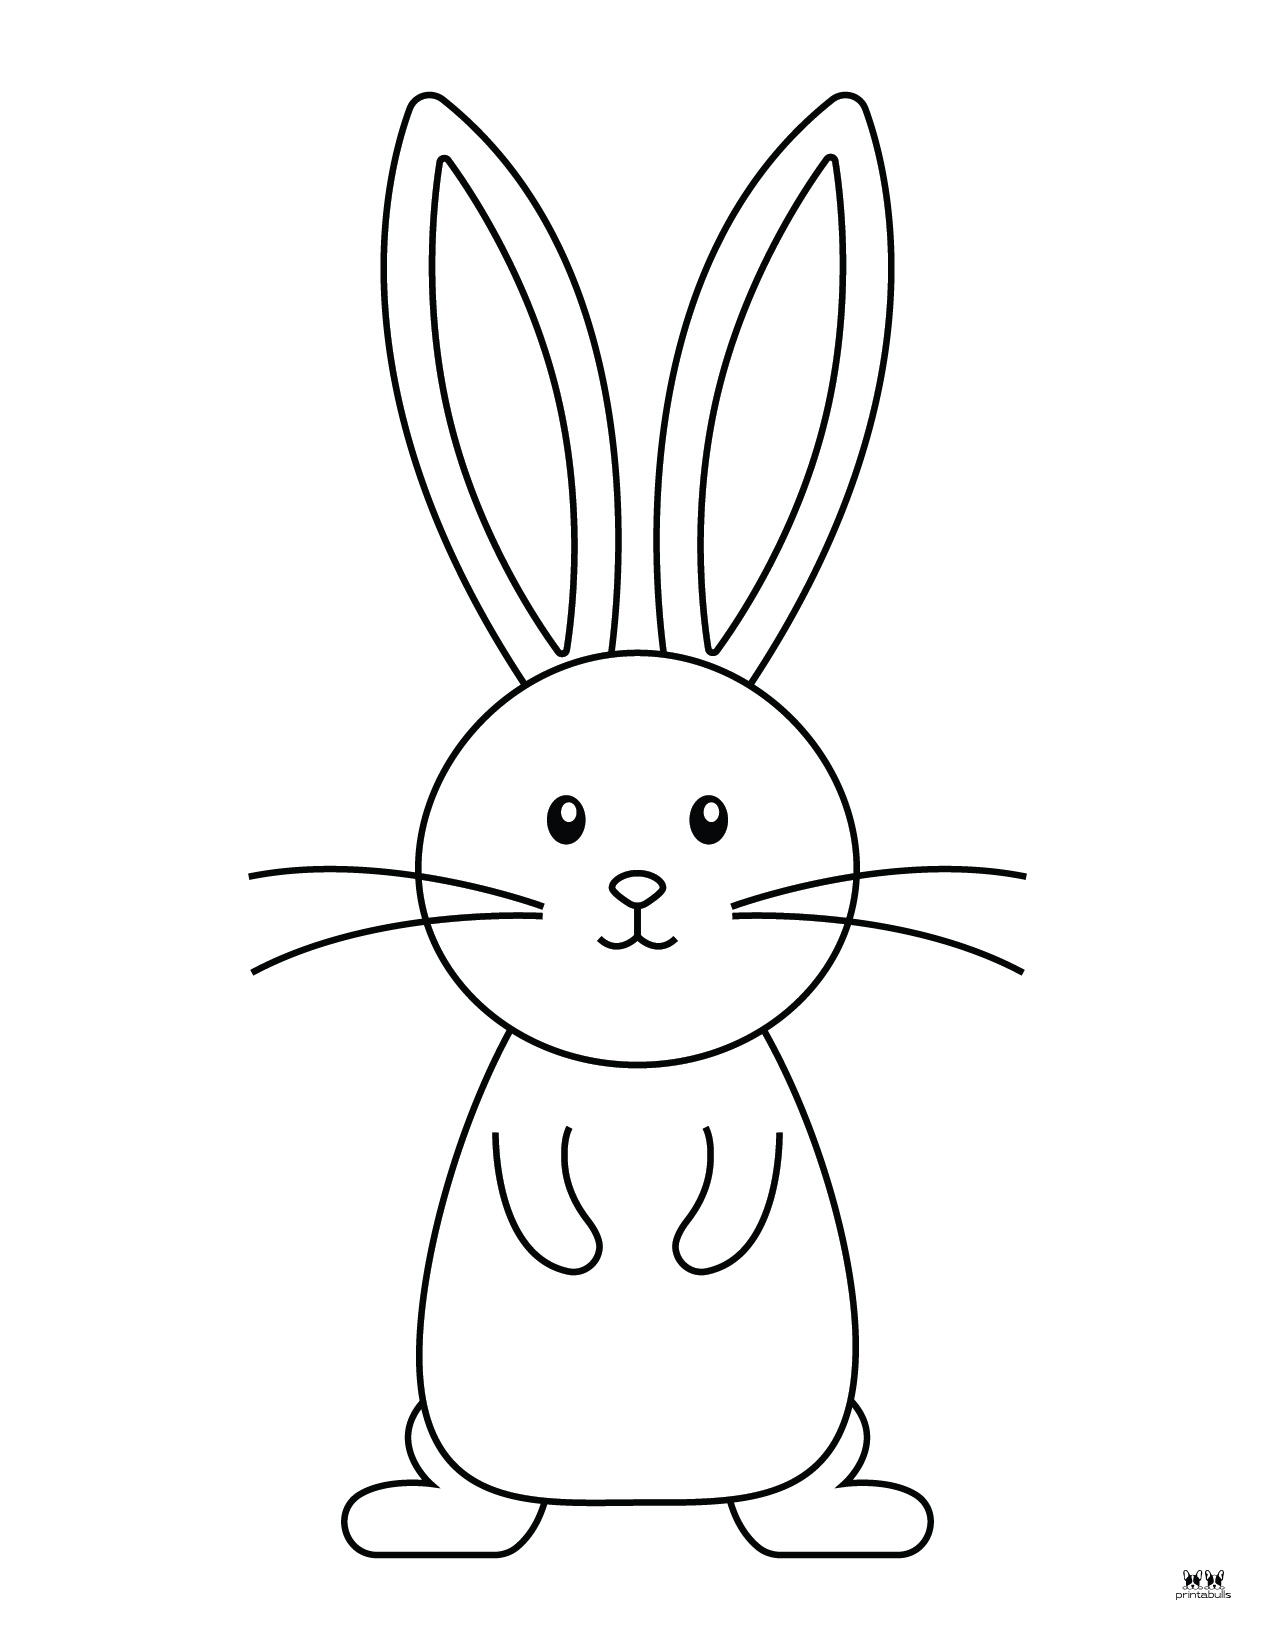 Easter Bunny Templates & Outlines - 53 FREE Pages | Printabulls